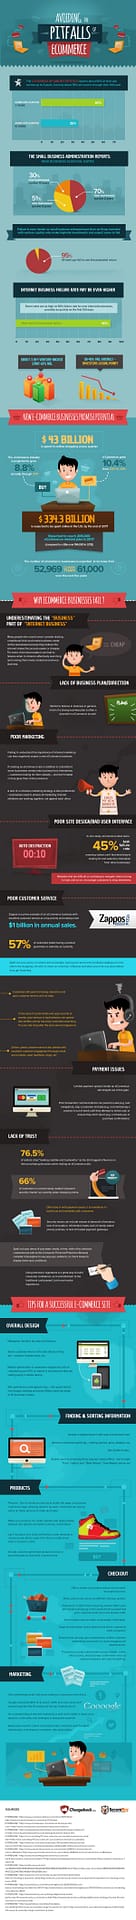 stop mistakes ecommerce infographic